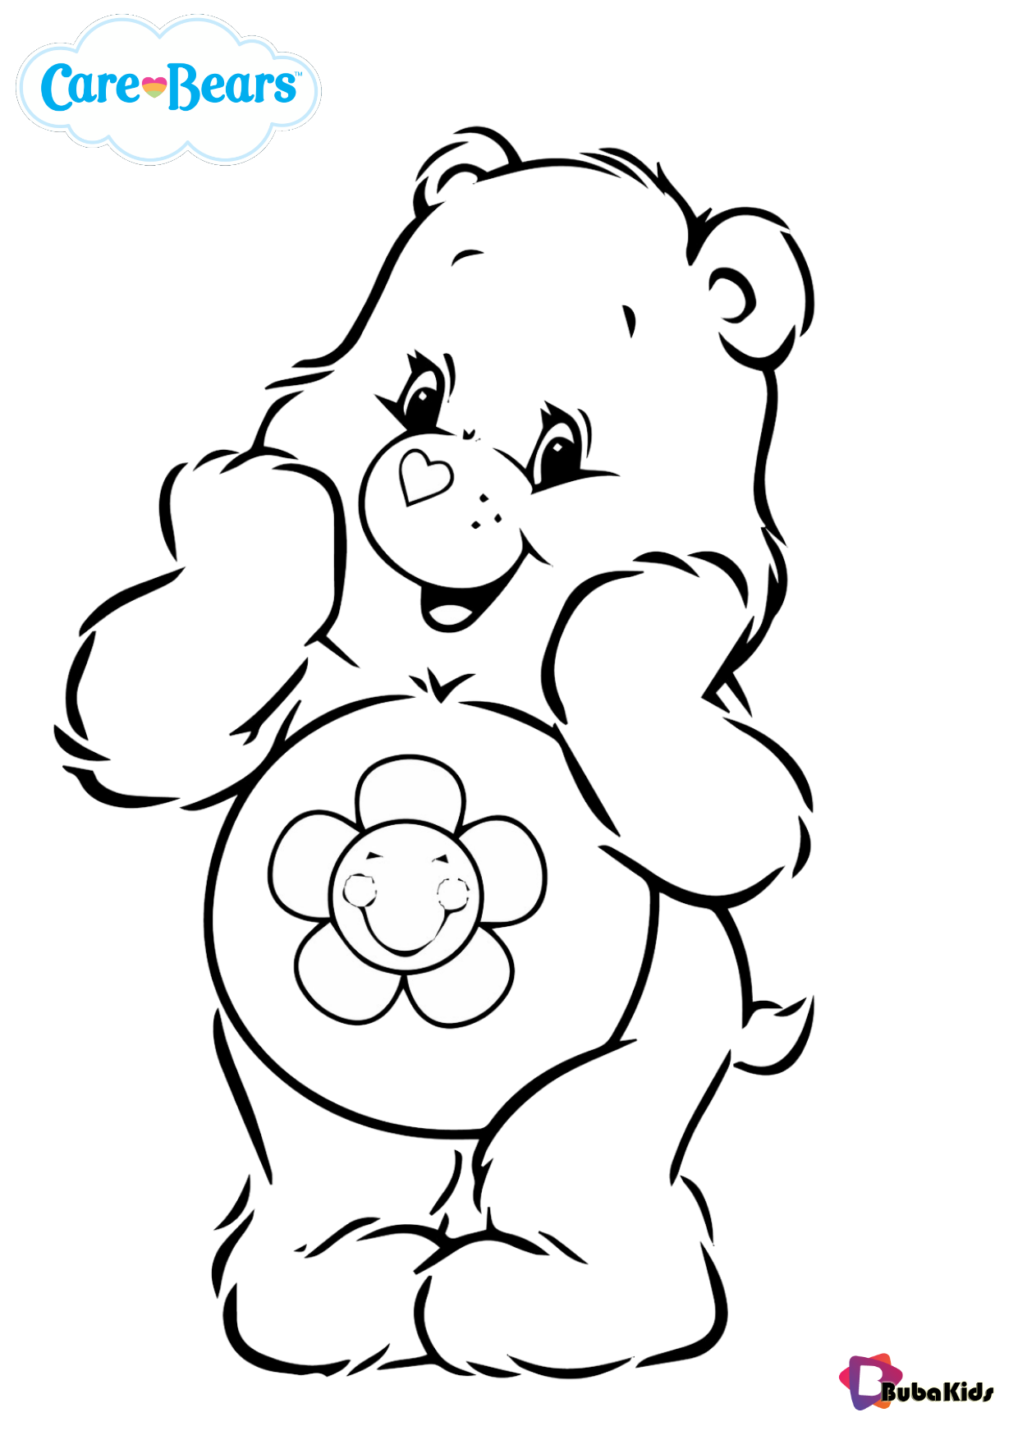 care bears Harmony bear coloring pages